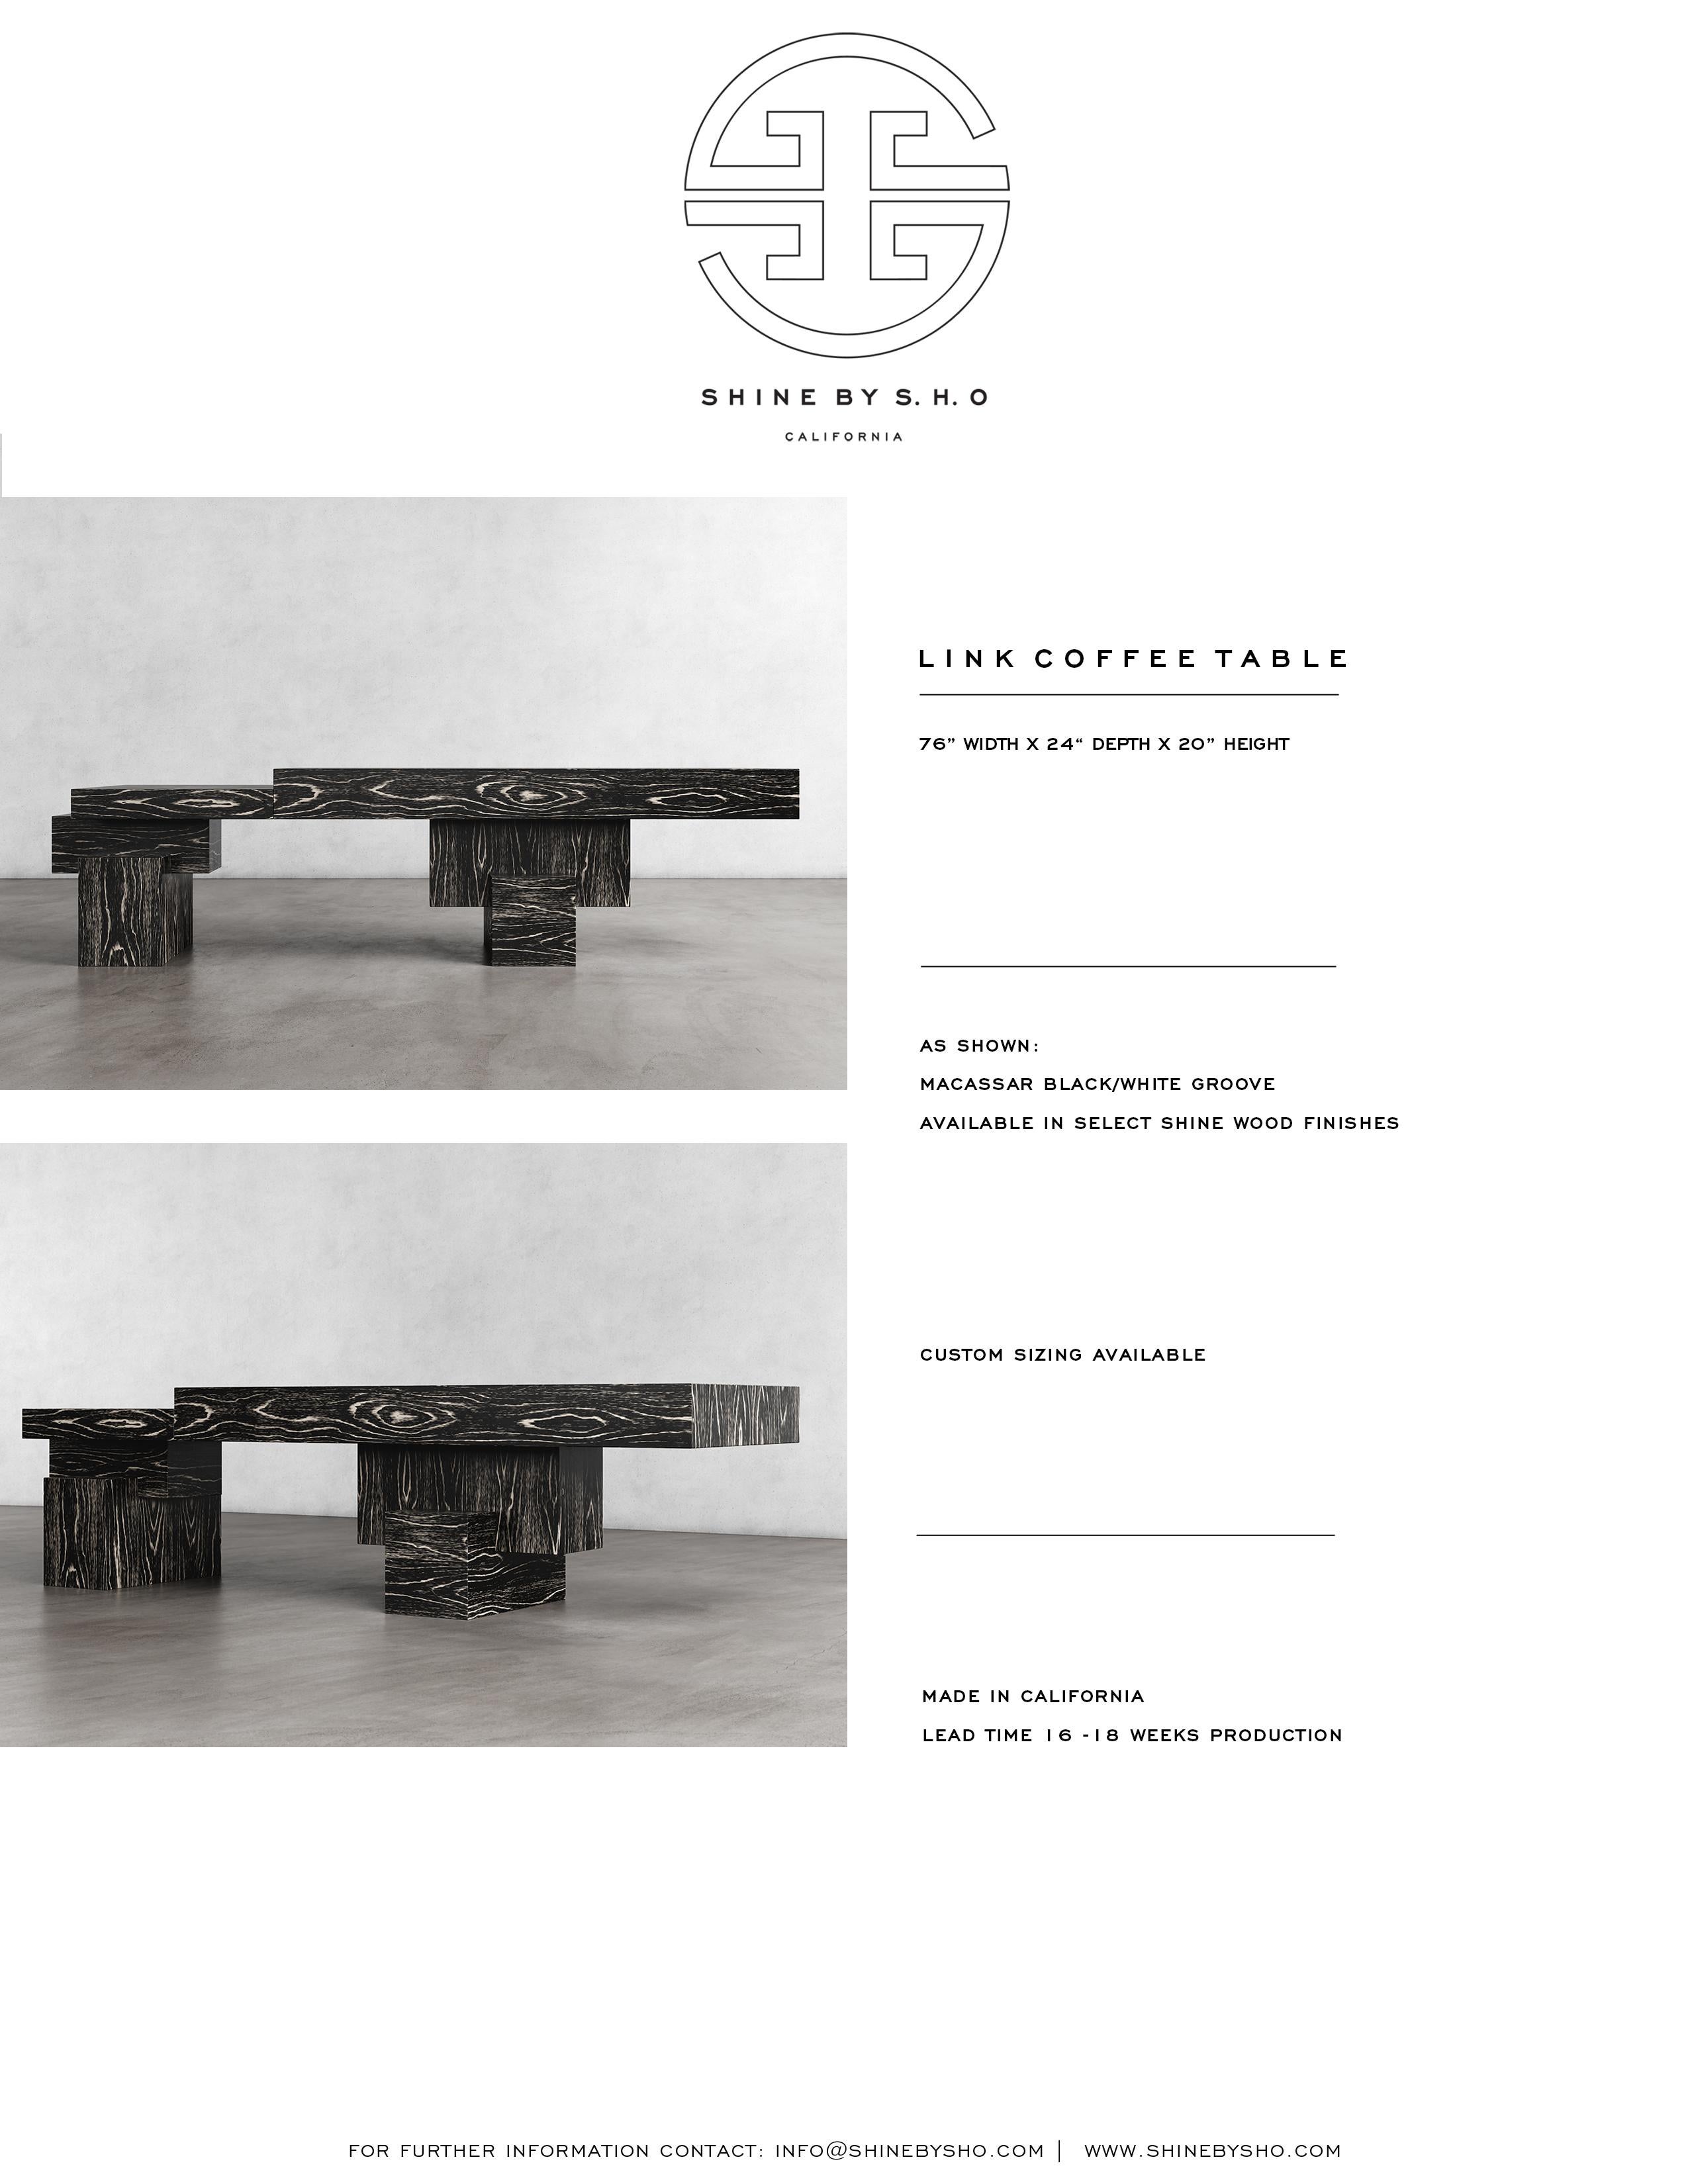 Contemporary LINK COFFEE TABLE - Modern Design with Macassar black/white groove For Sale